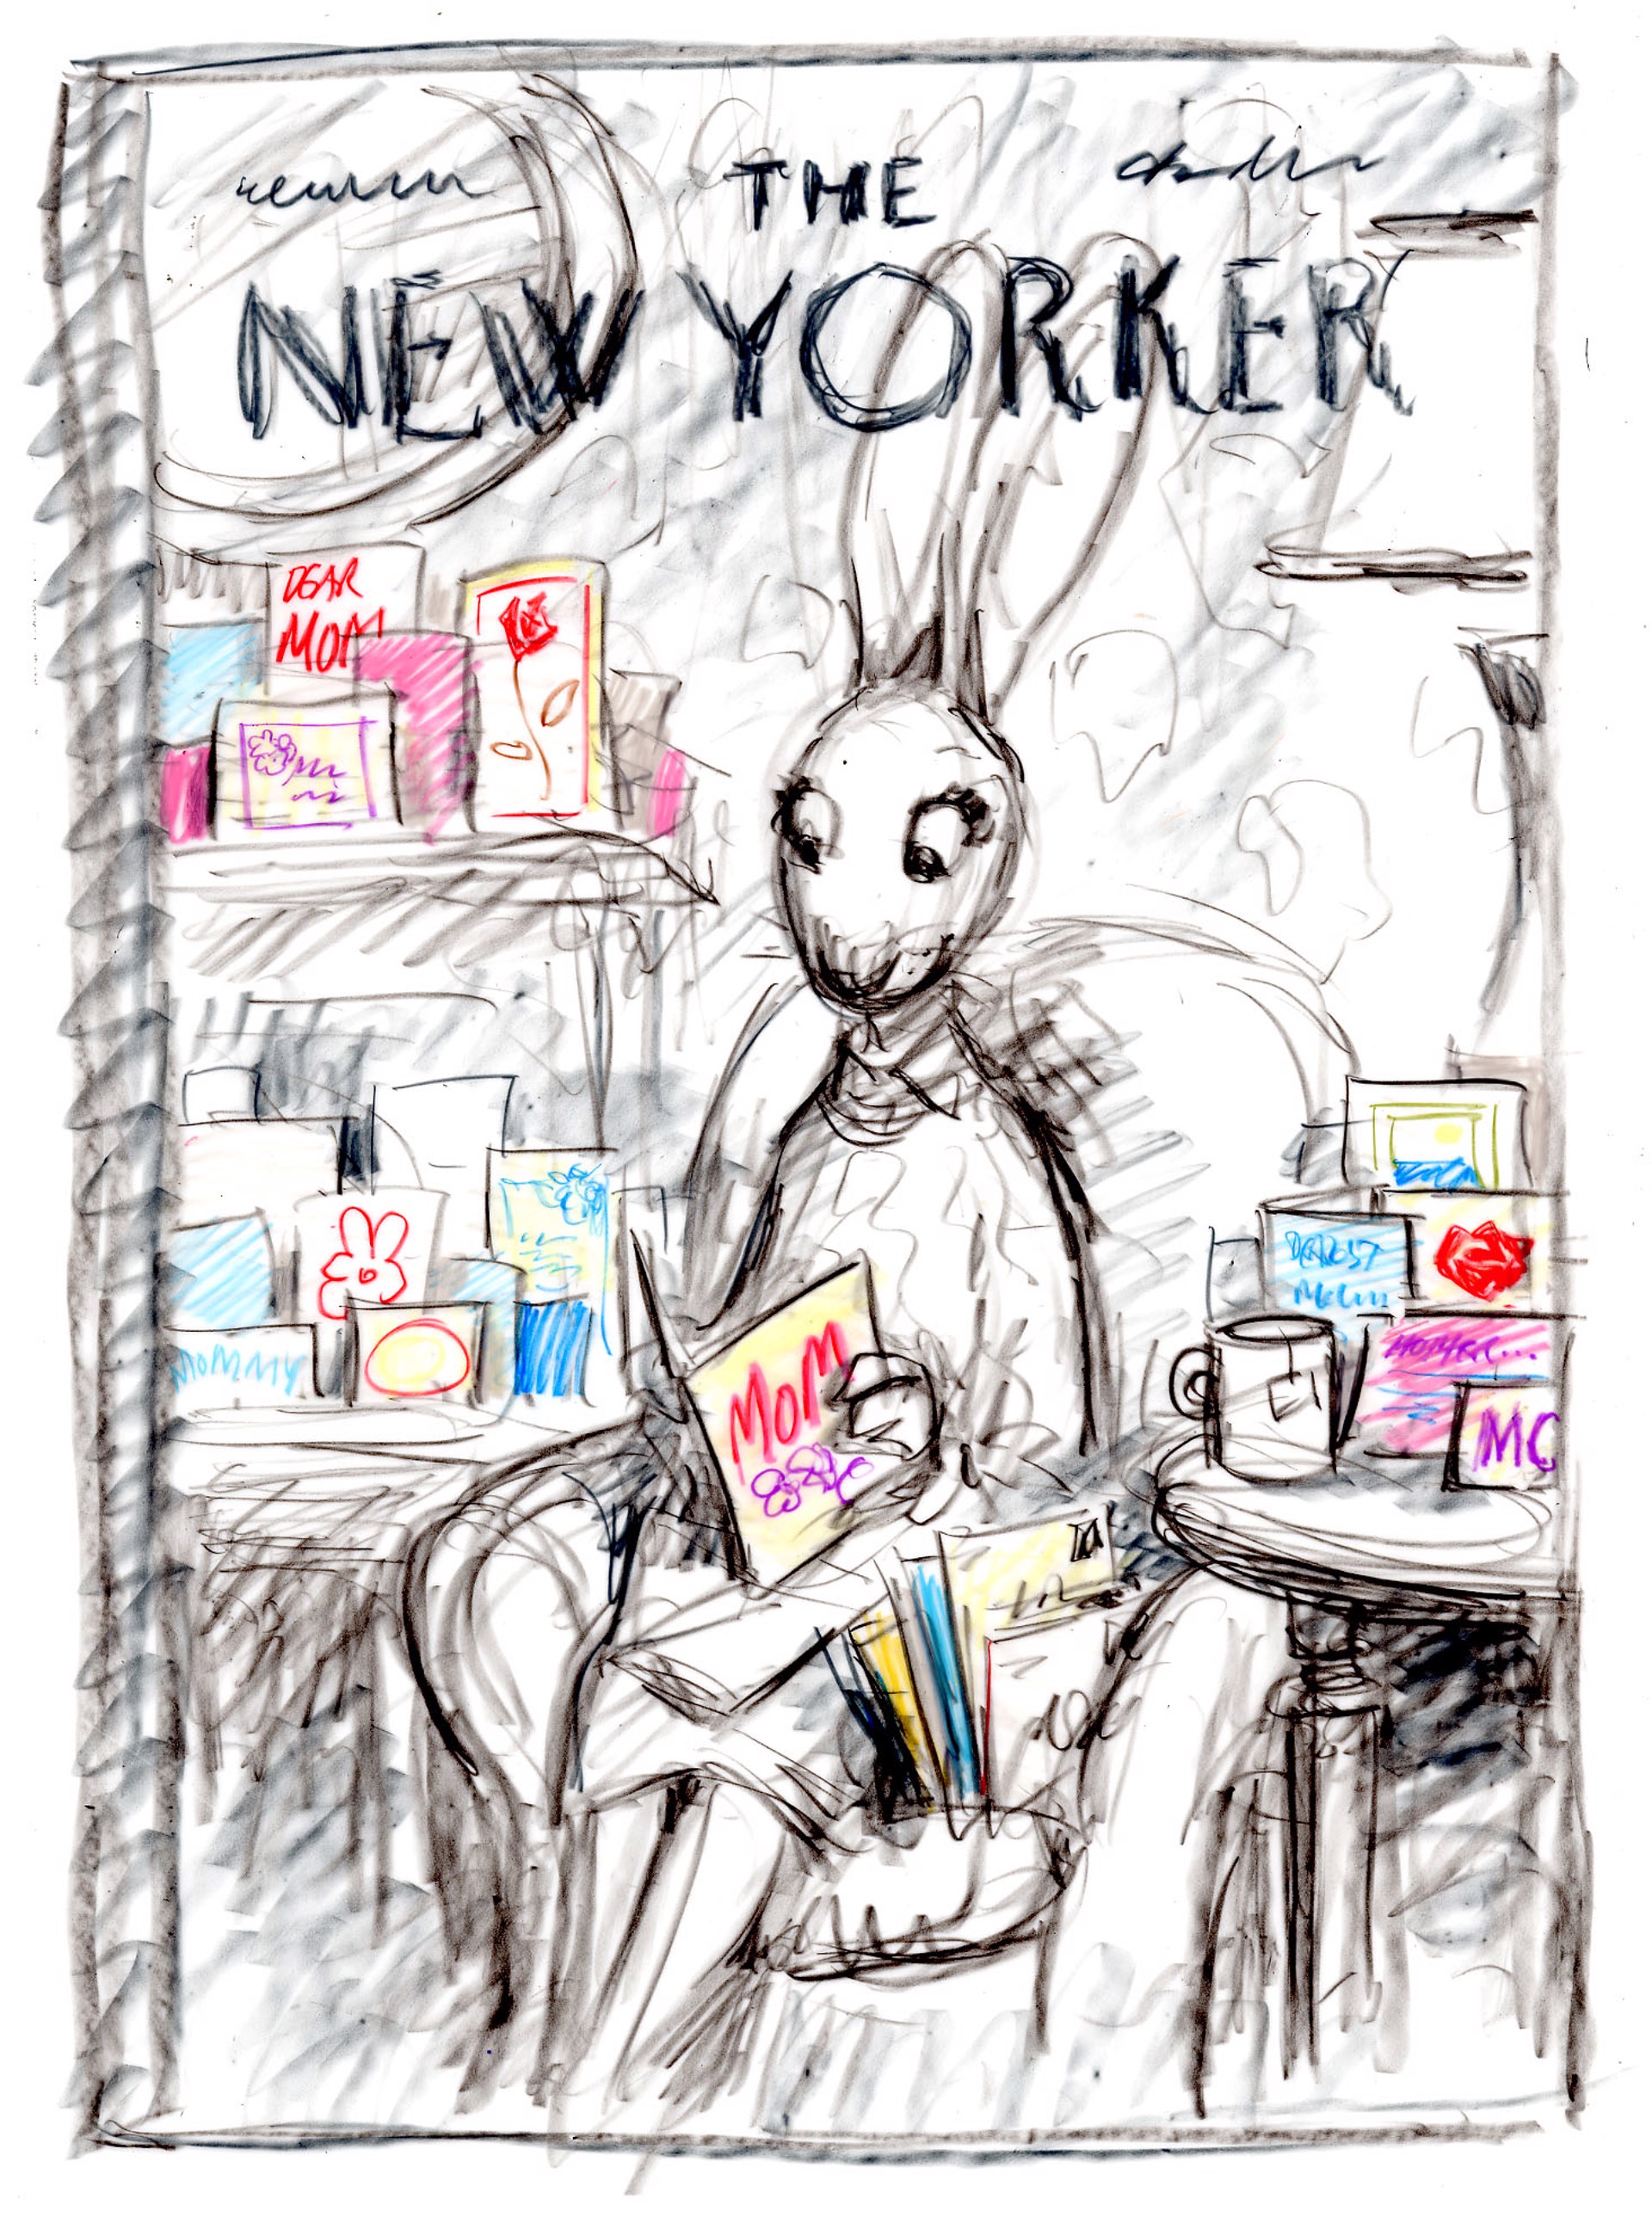 Proposed sketch for New Yorker cover "Mother's Day" by Peter de Sève